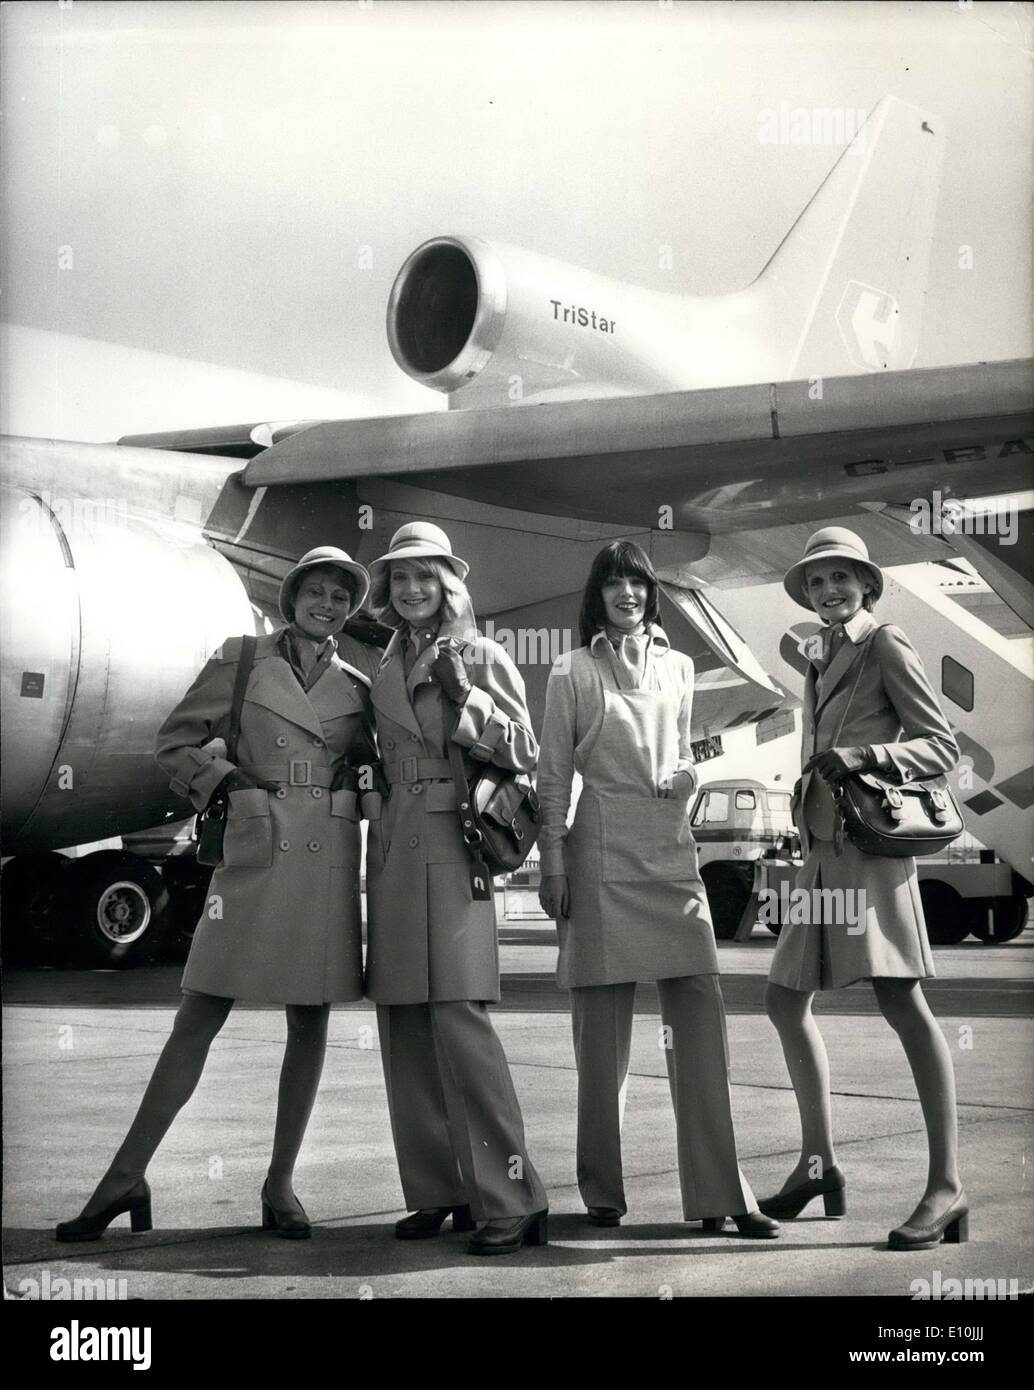 Mar. 03, 1973 - Court Line Introduces new uniforms designed by Mary Quant: New stewardesses uniforms for Court Line Aviation, Britain's biggest holiday airline, were shown for the first time today at Luton Airport. They have been designed by Mary Quant and are being introduced to coincide with the entry into service of Court Line's new Lockheed Tristar fleet at the beginning of next month. The fashion show took place on board 'Halcyon Days', the first of two TriStars ordered by the airline Stock Photo